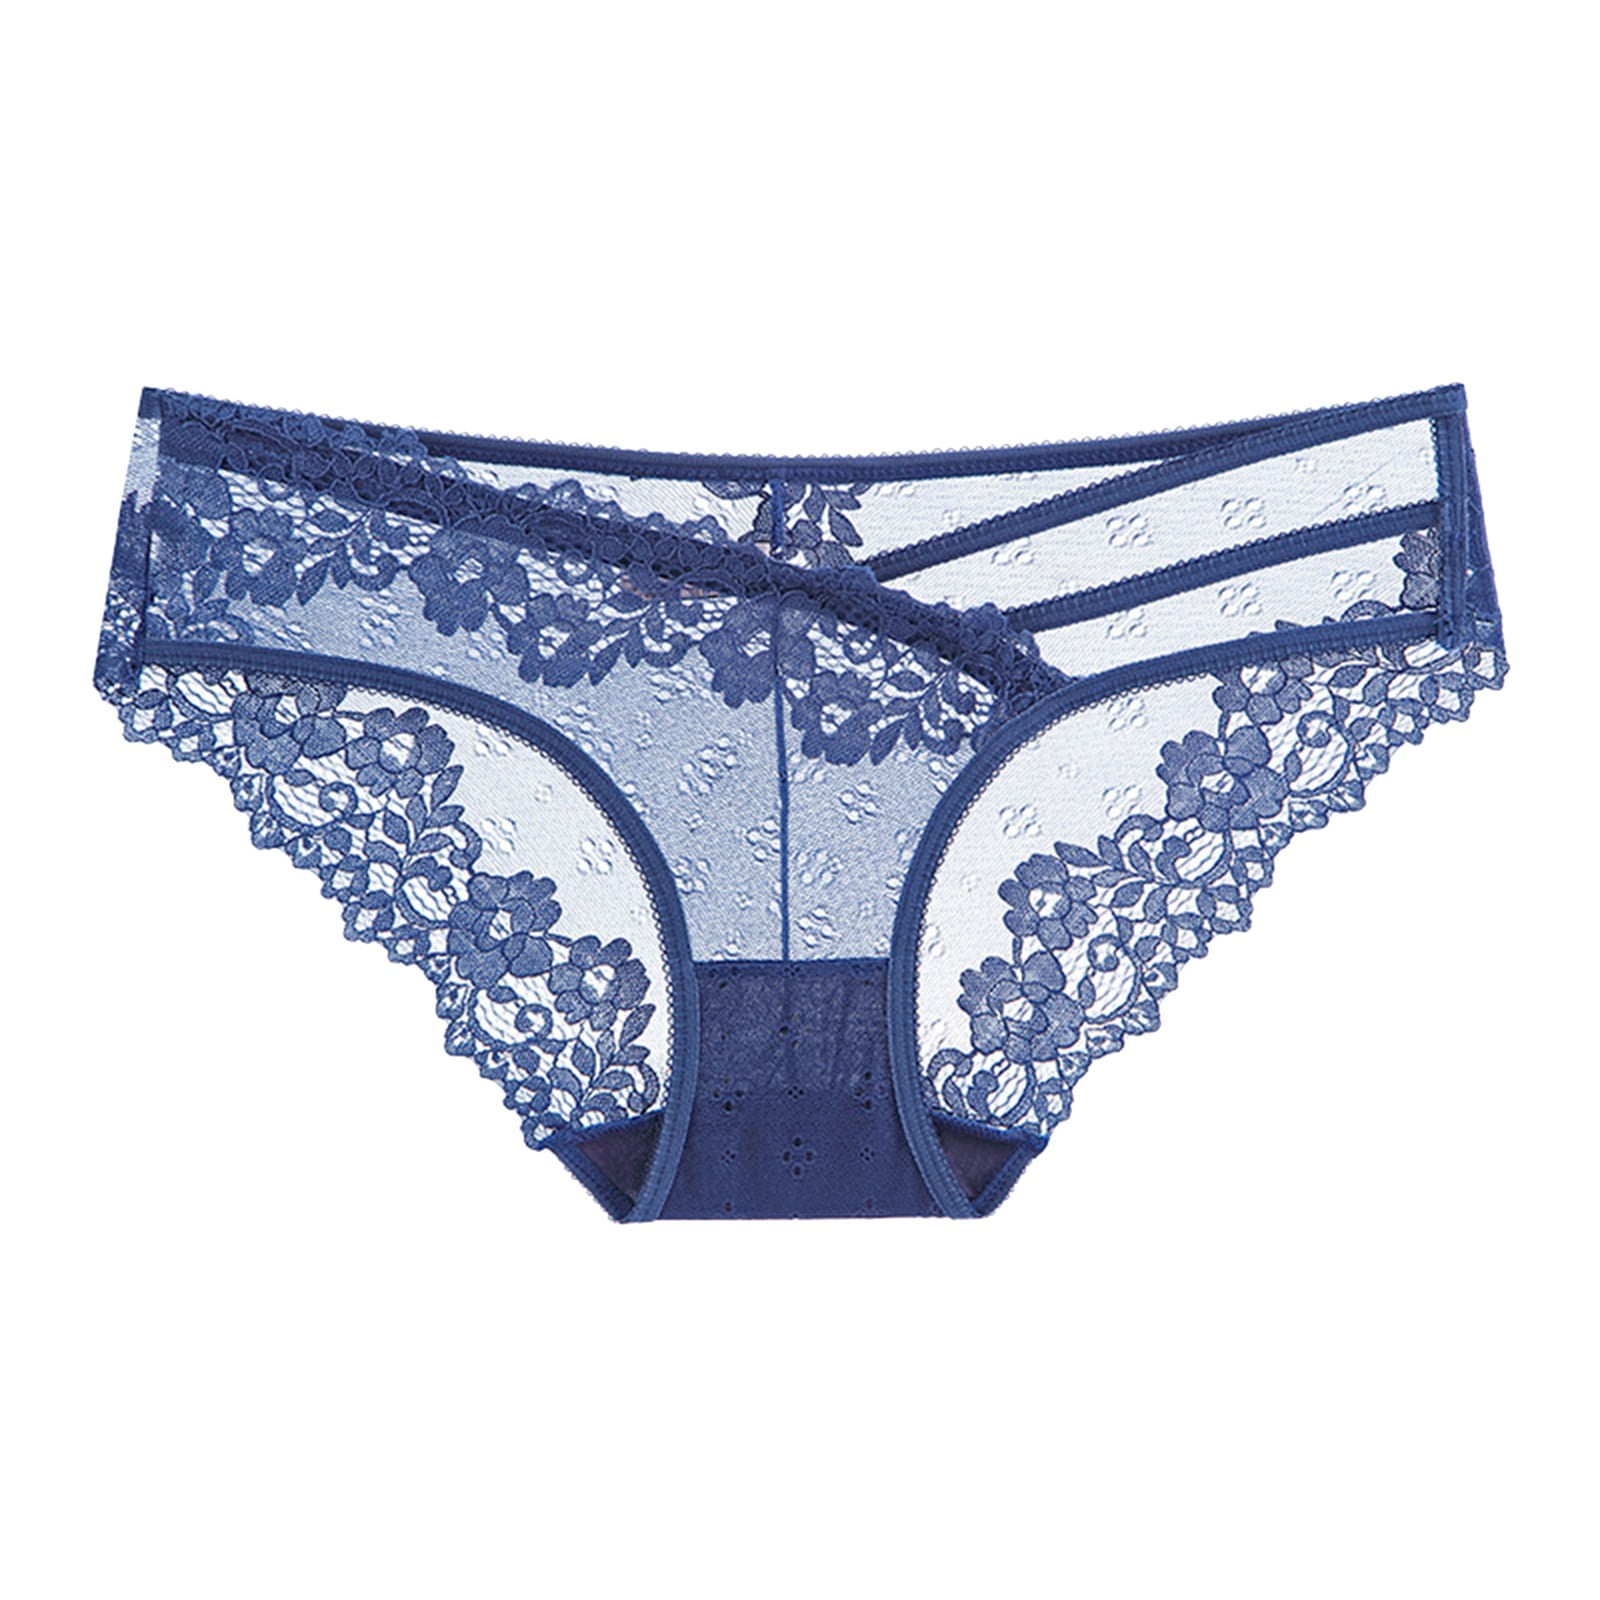 Top Rated Products in All Panties